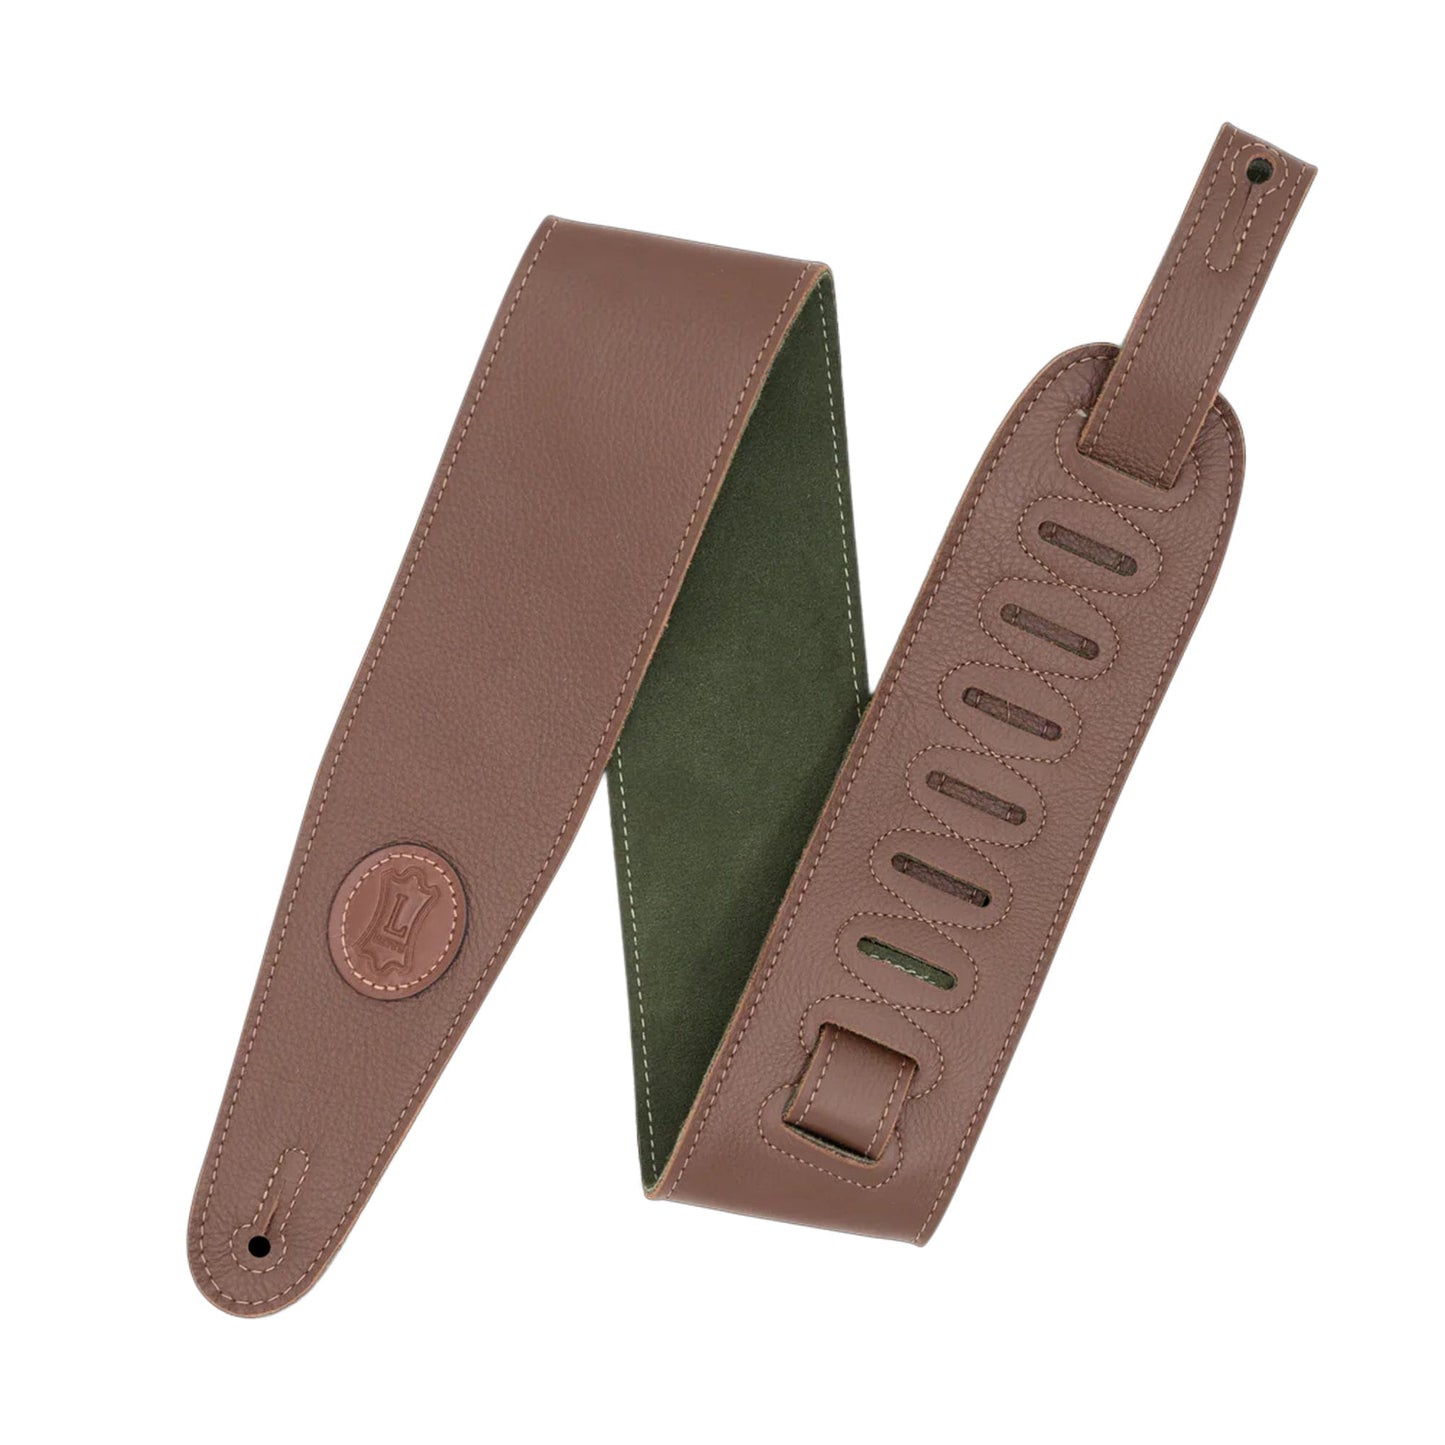 Levy's 3" Garment Leather Strap Brown w/Olive Green Suede Backing Accessories / Straps